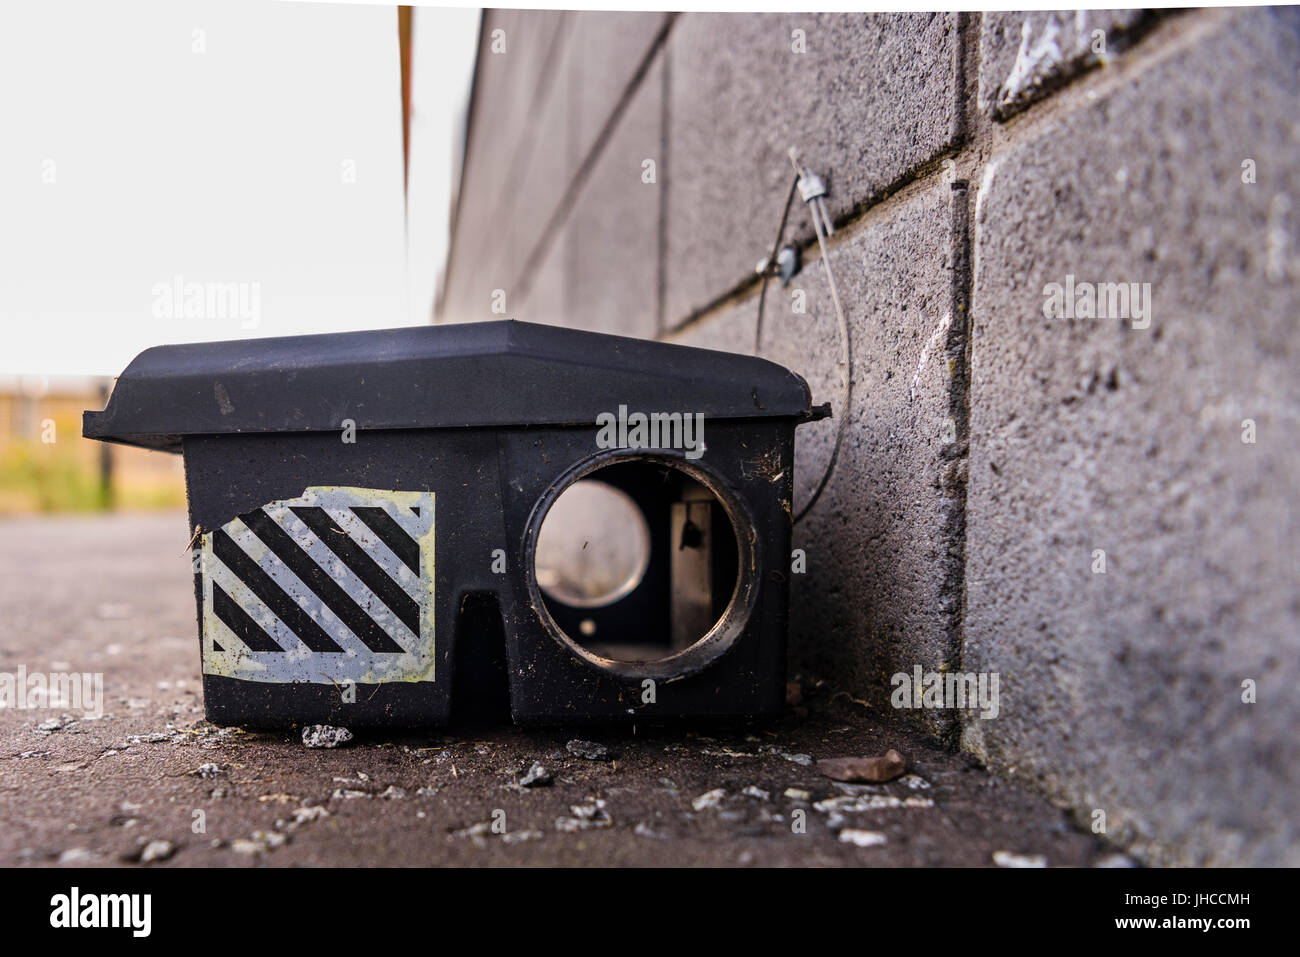 Rat trap on ground outside a building, containing poison. Stock Photo